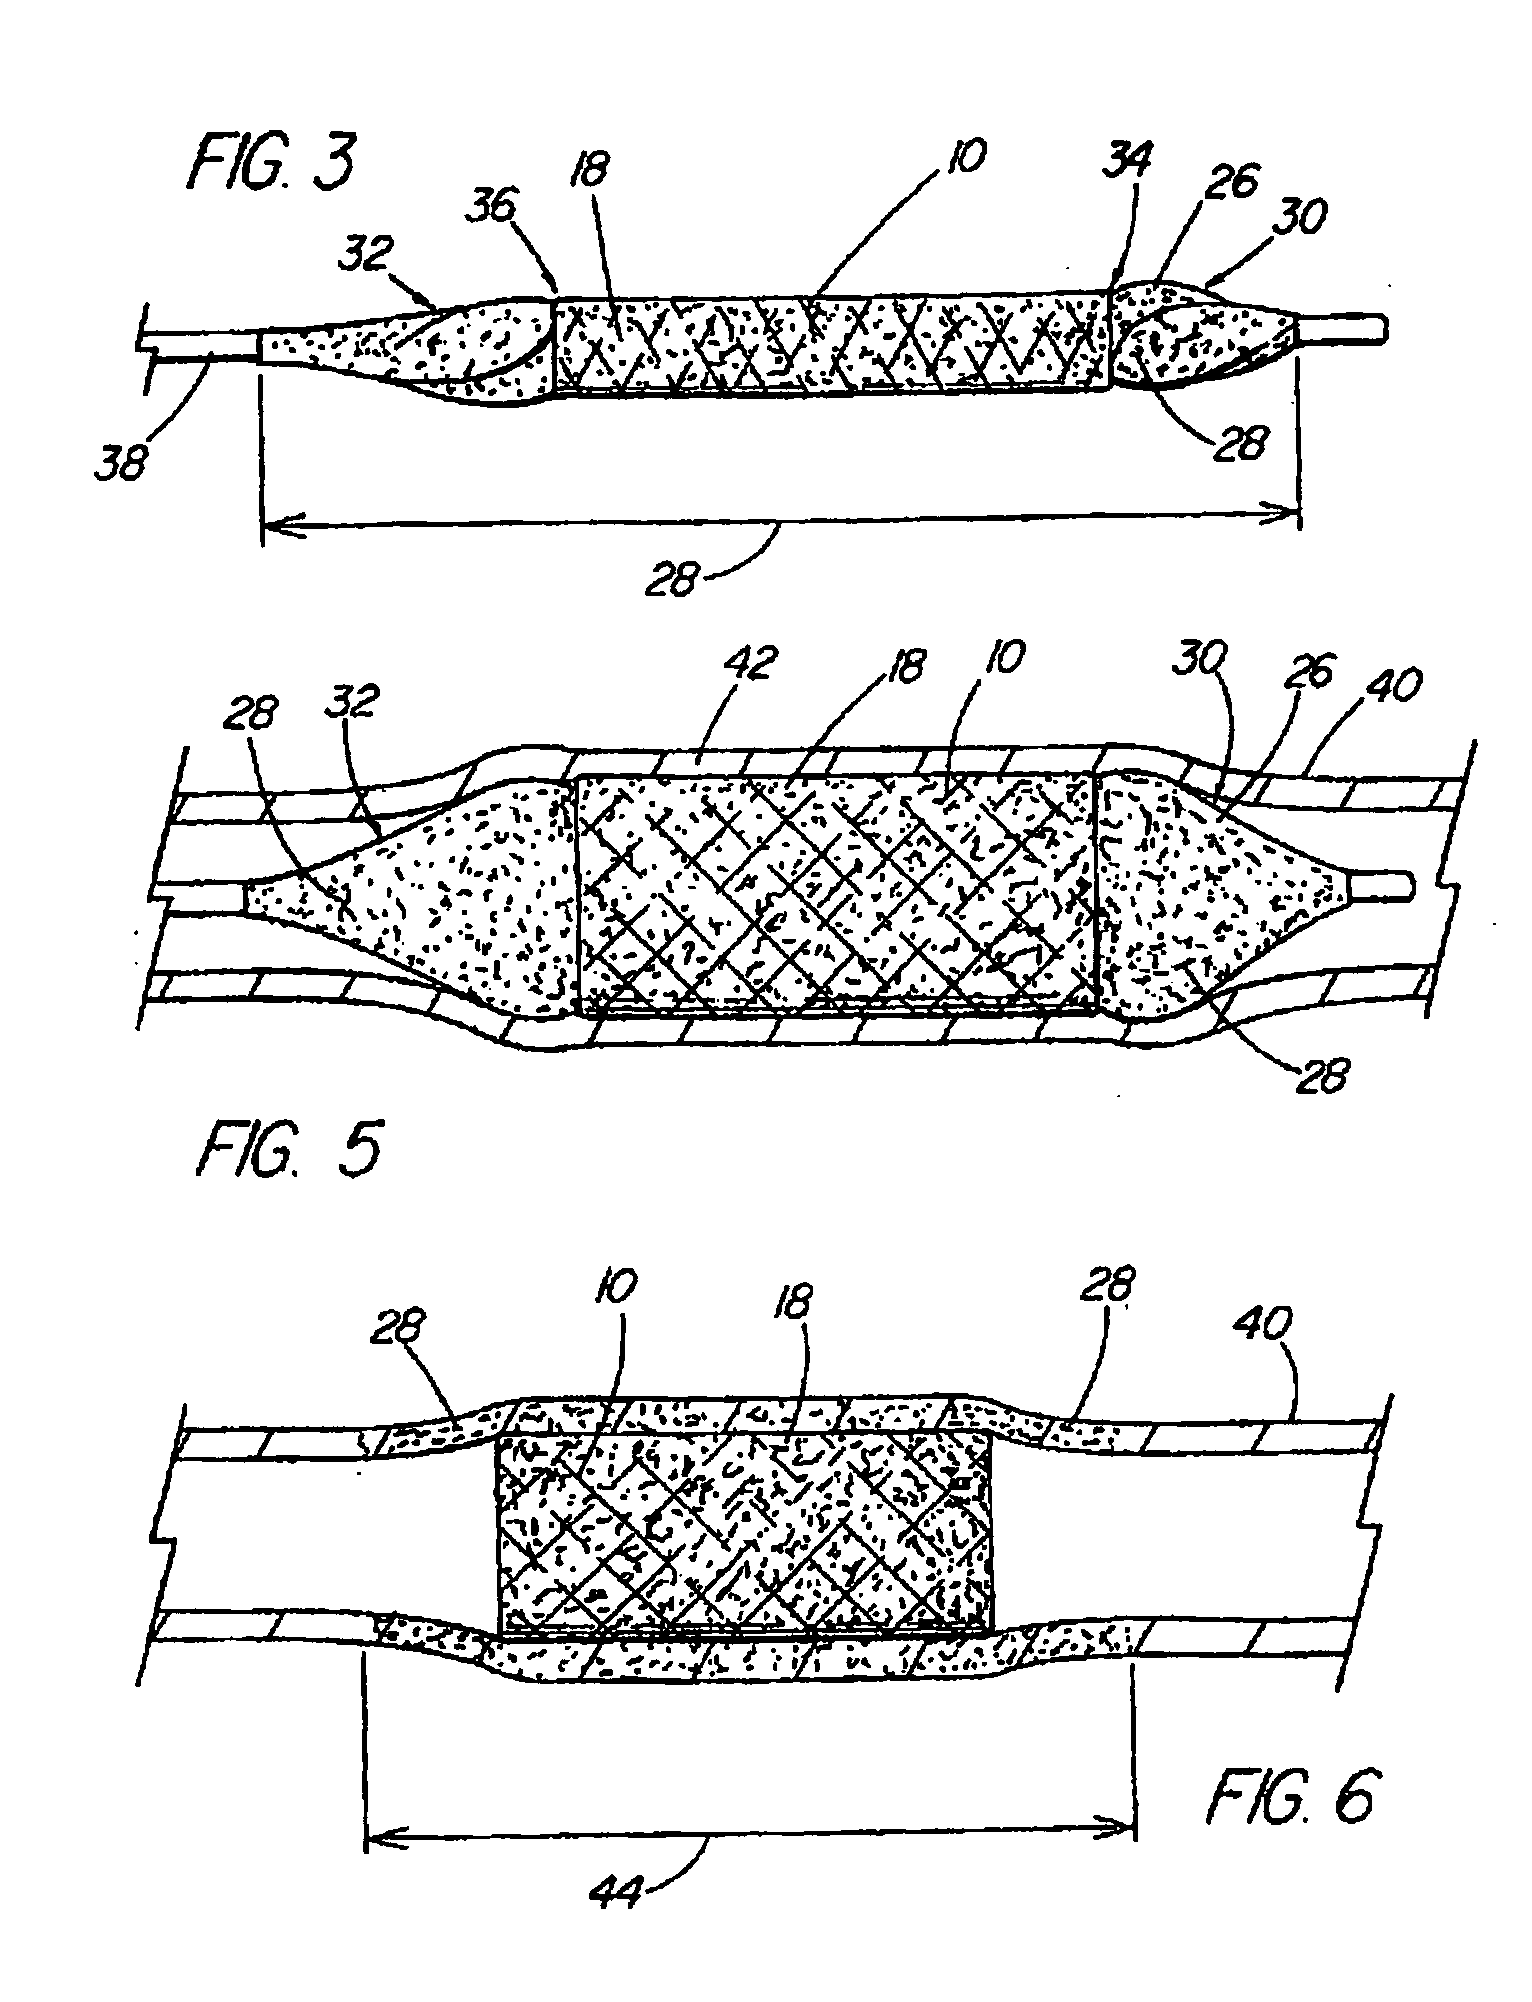 Coated medical device